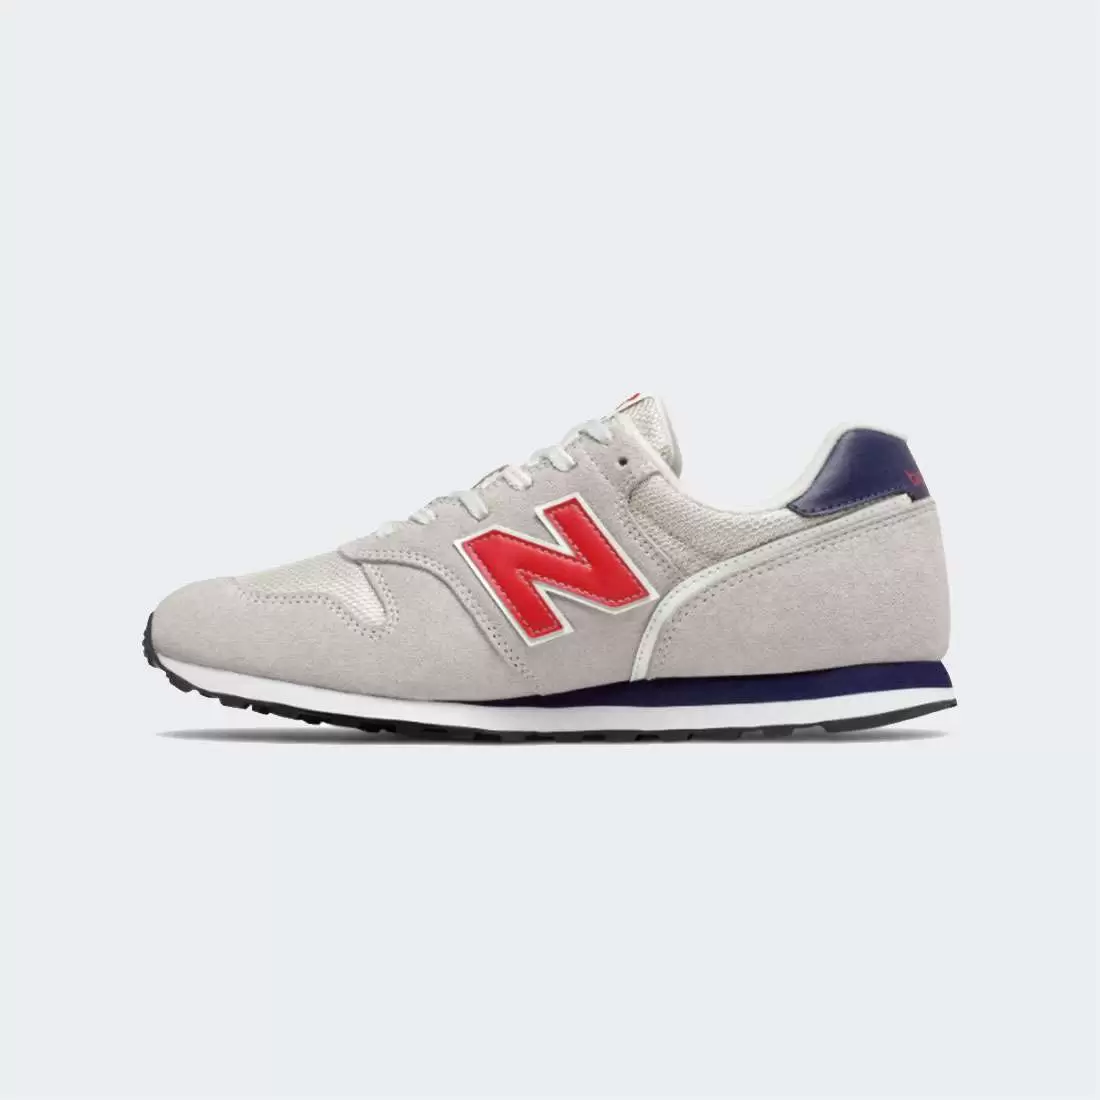 NEW BALANCE 373 OFF WHITE/RED